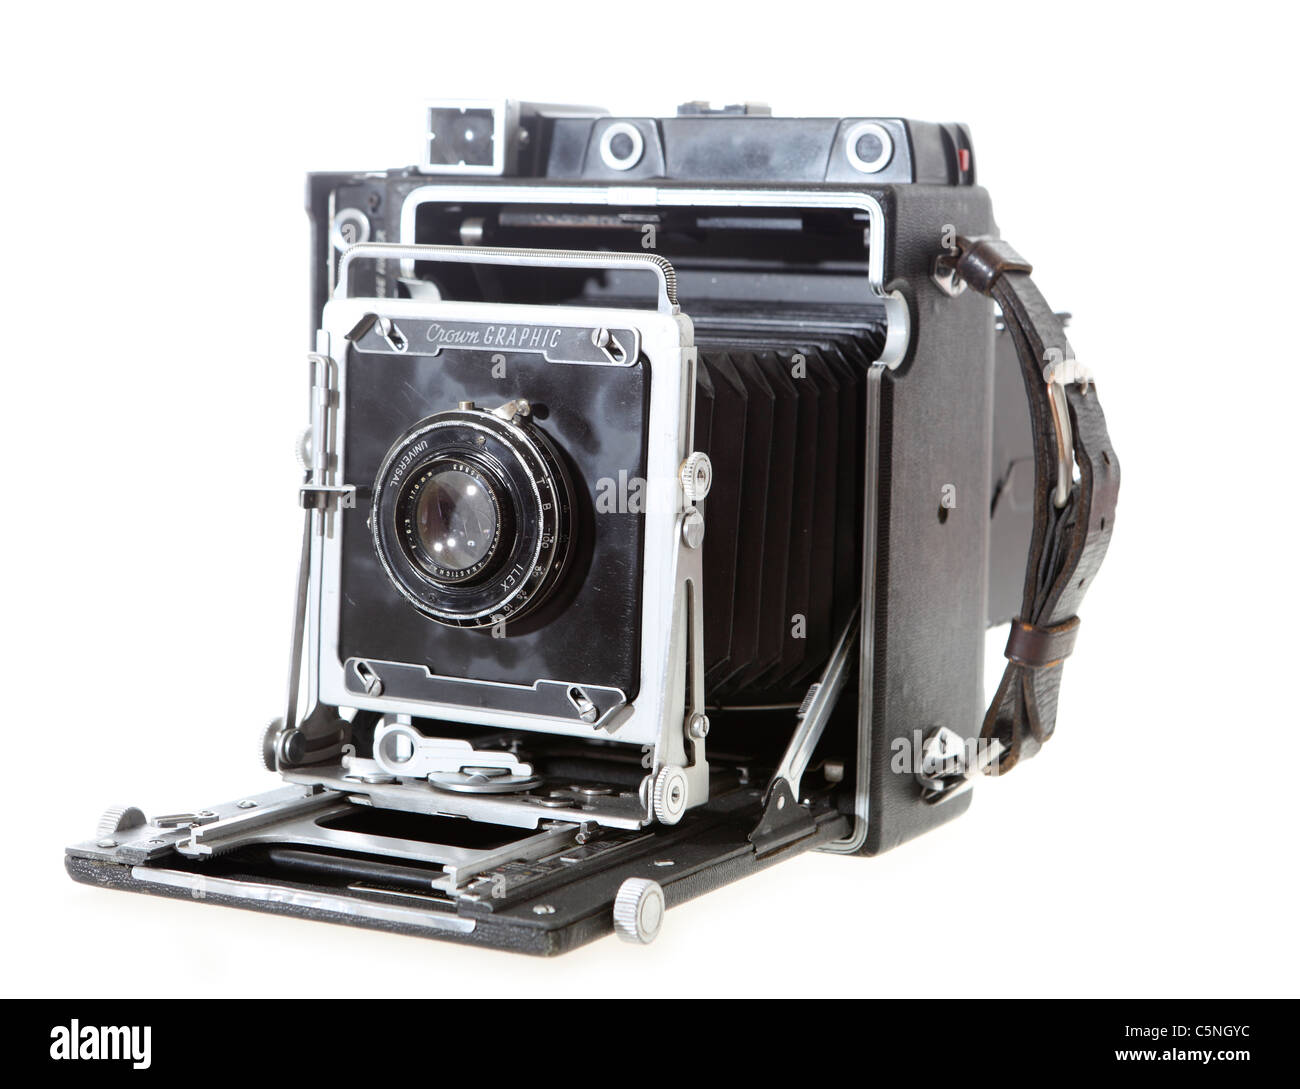 A 4x5 Crown Graphic American press camera probably c.1958 with a 1930s Kodak lens in an Ilex shutter, isolated on white. Stock Photo